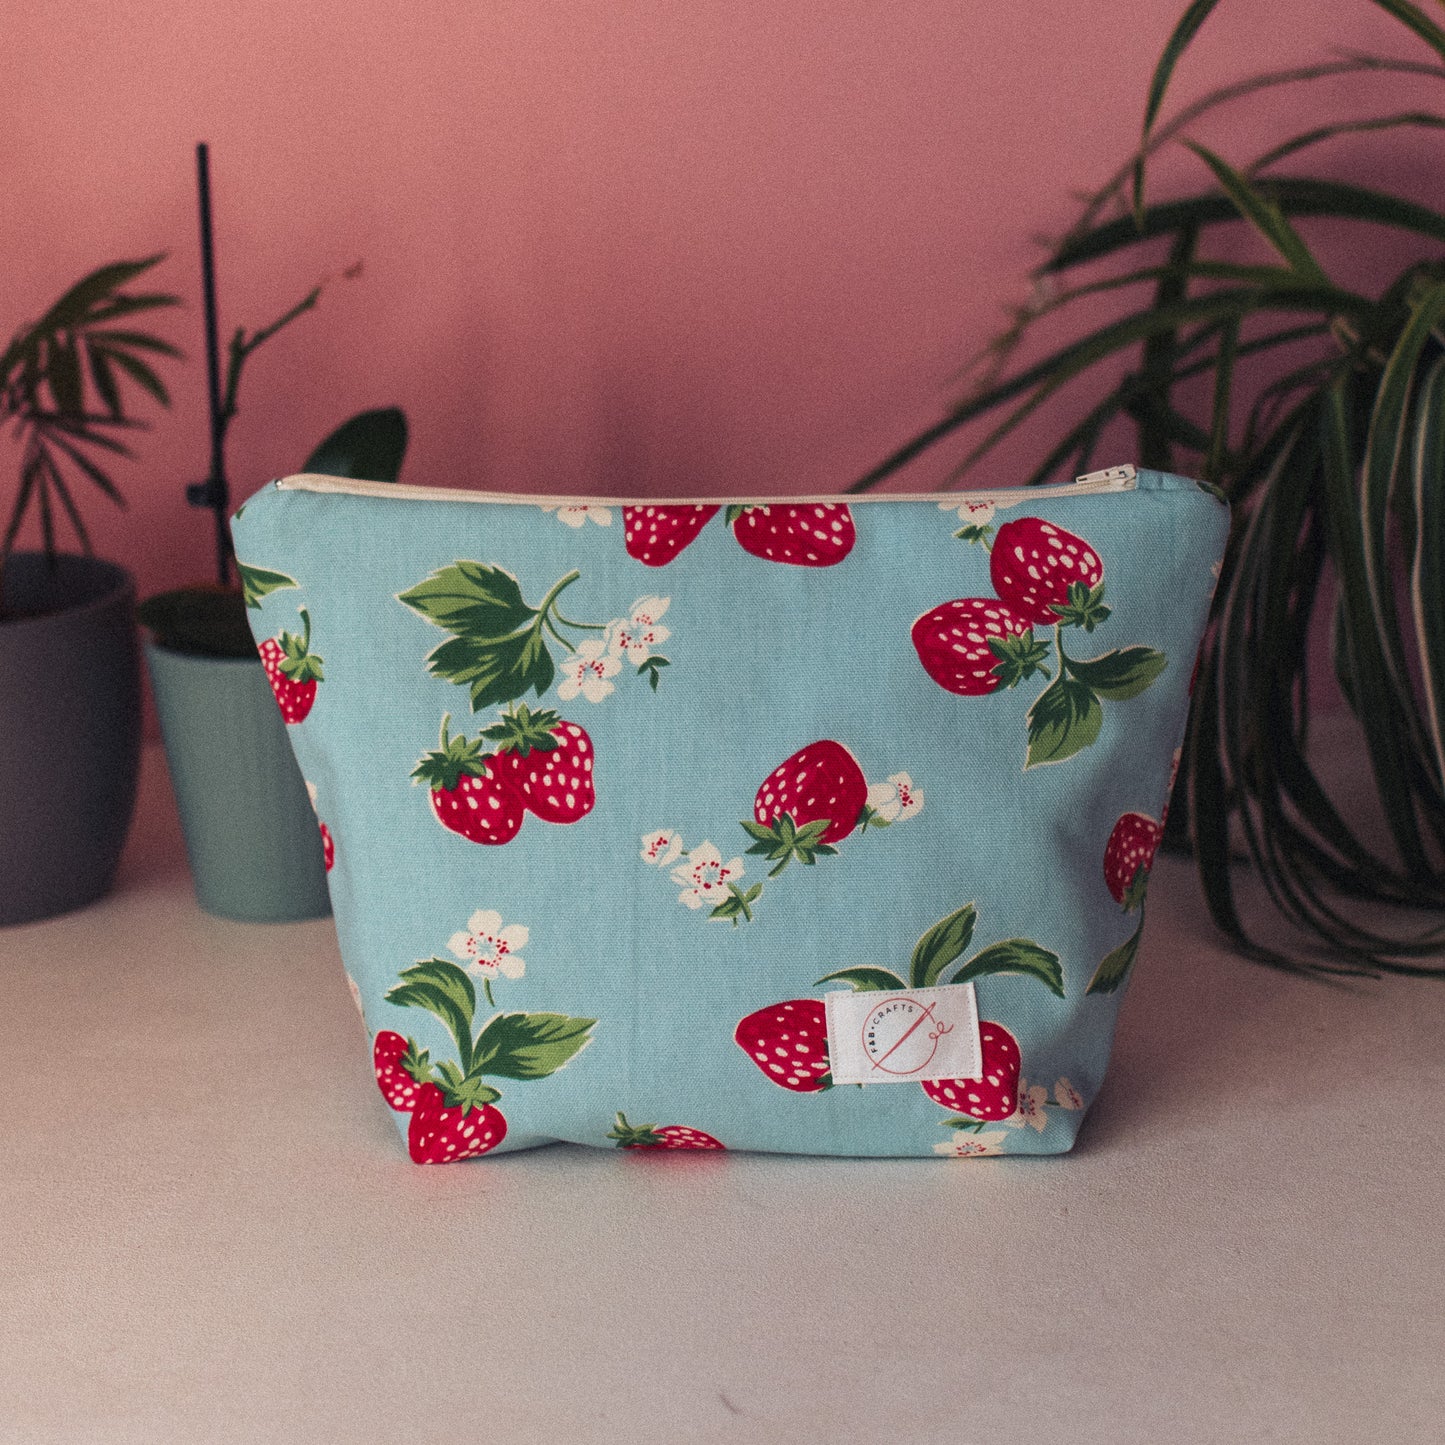 Large Strawberry Print Vintage 1950s Wash Bag by F&B Crafts